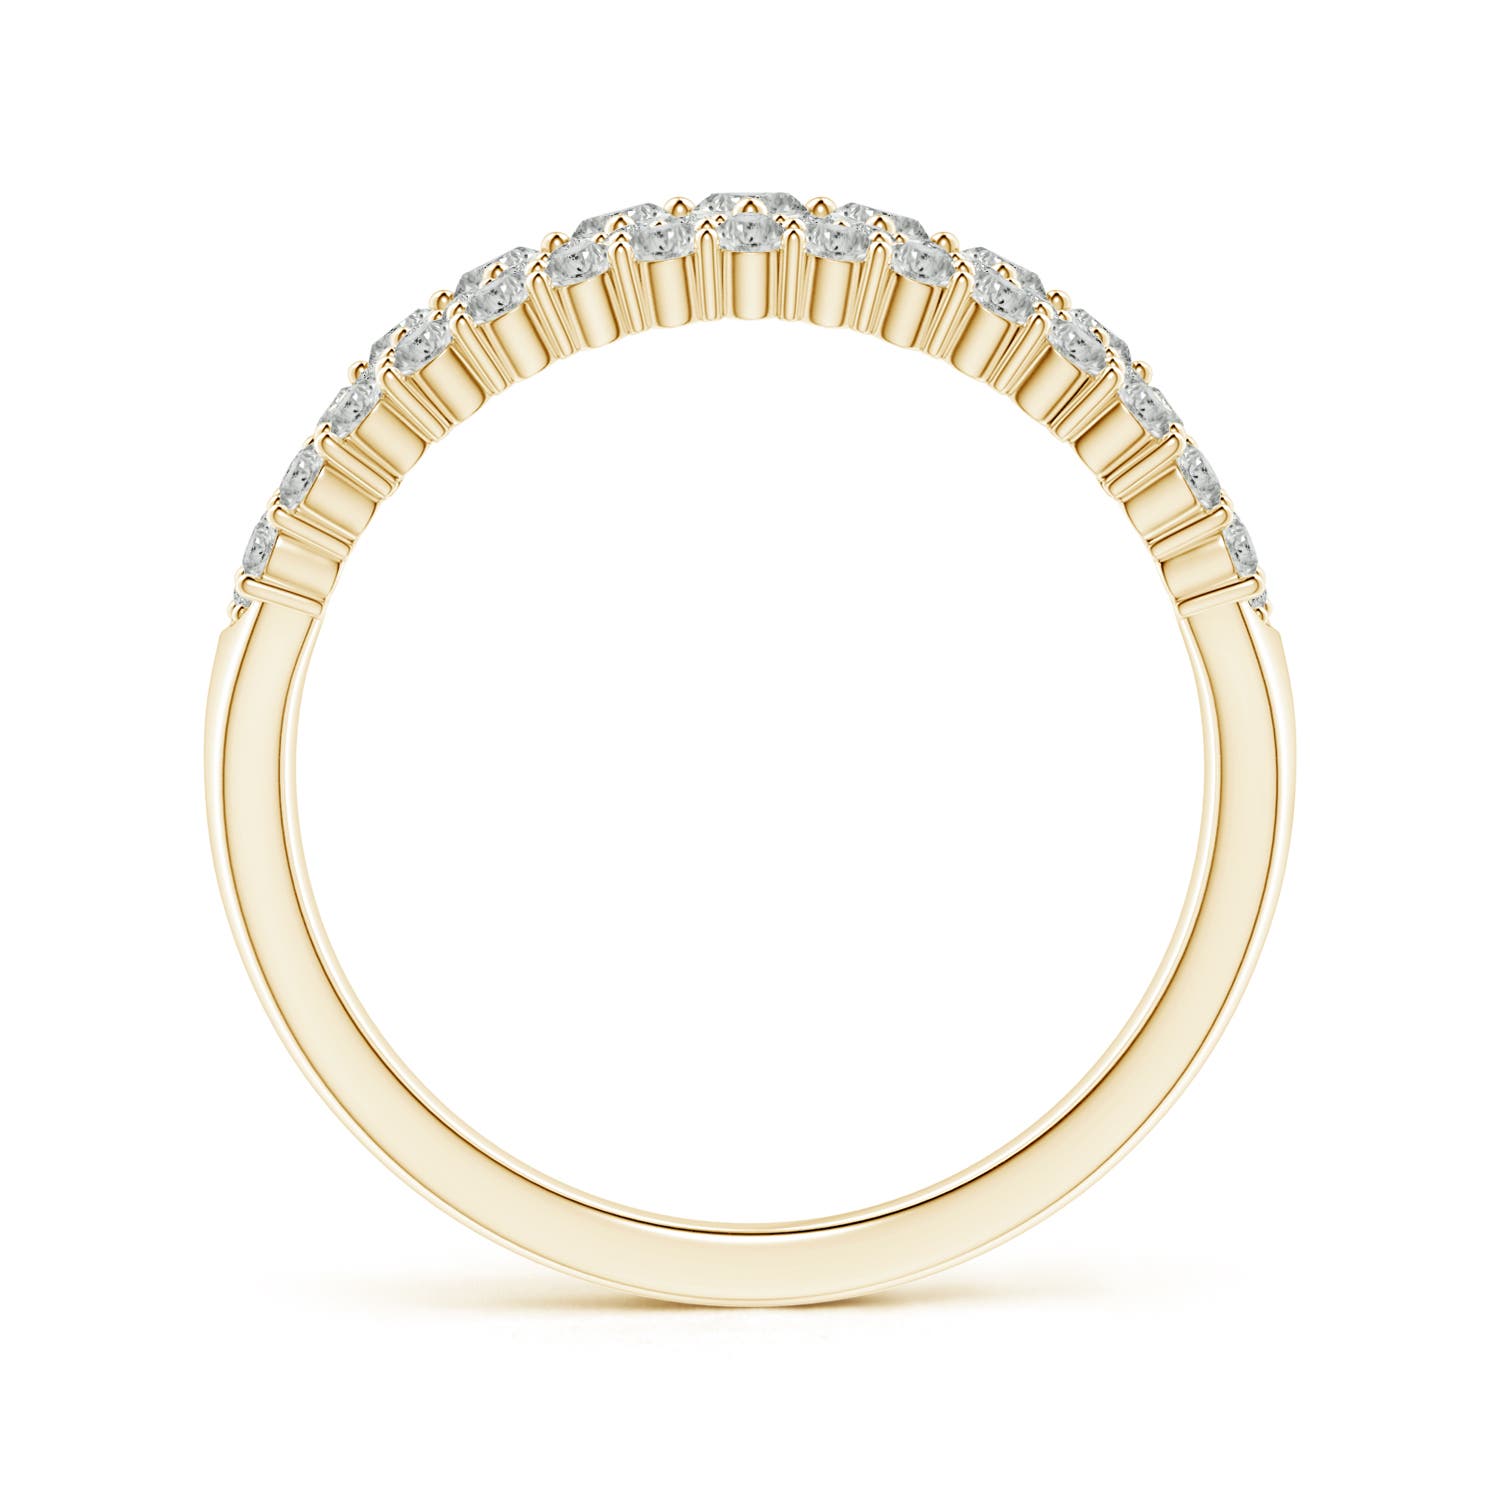 K, I3 / 1.15 CT / 14 KT Yellow Gold